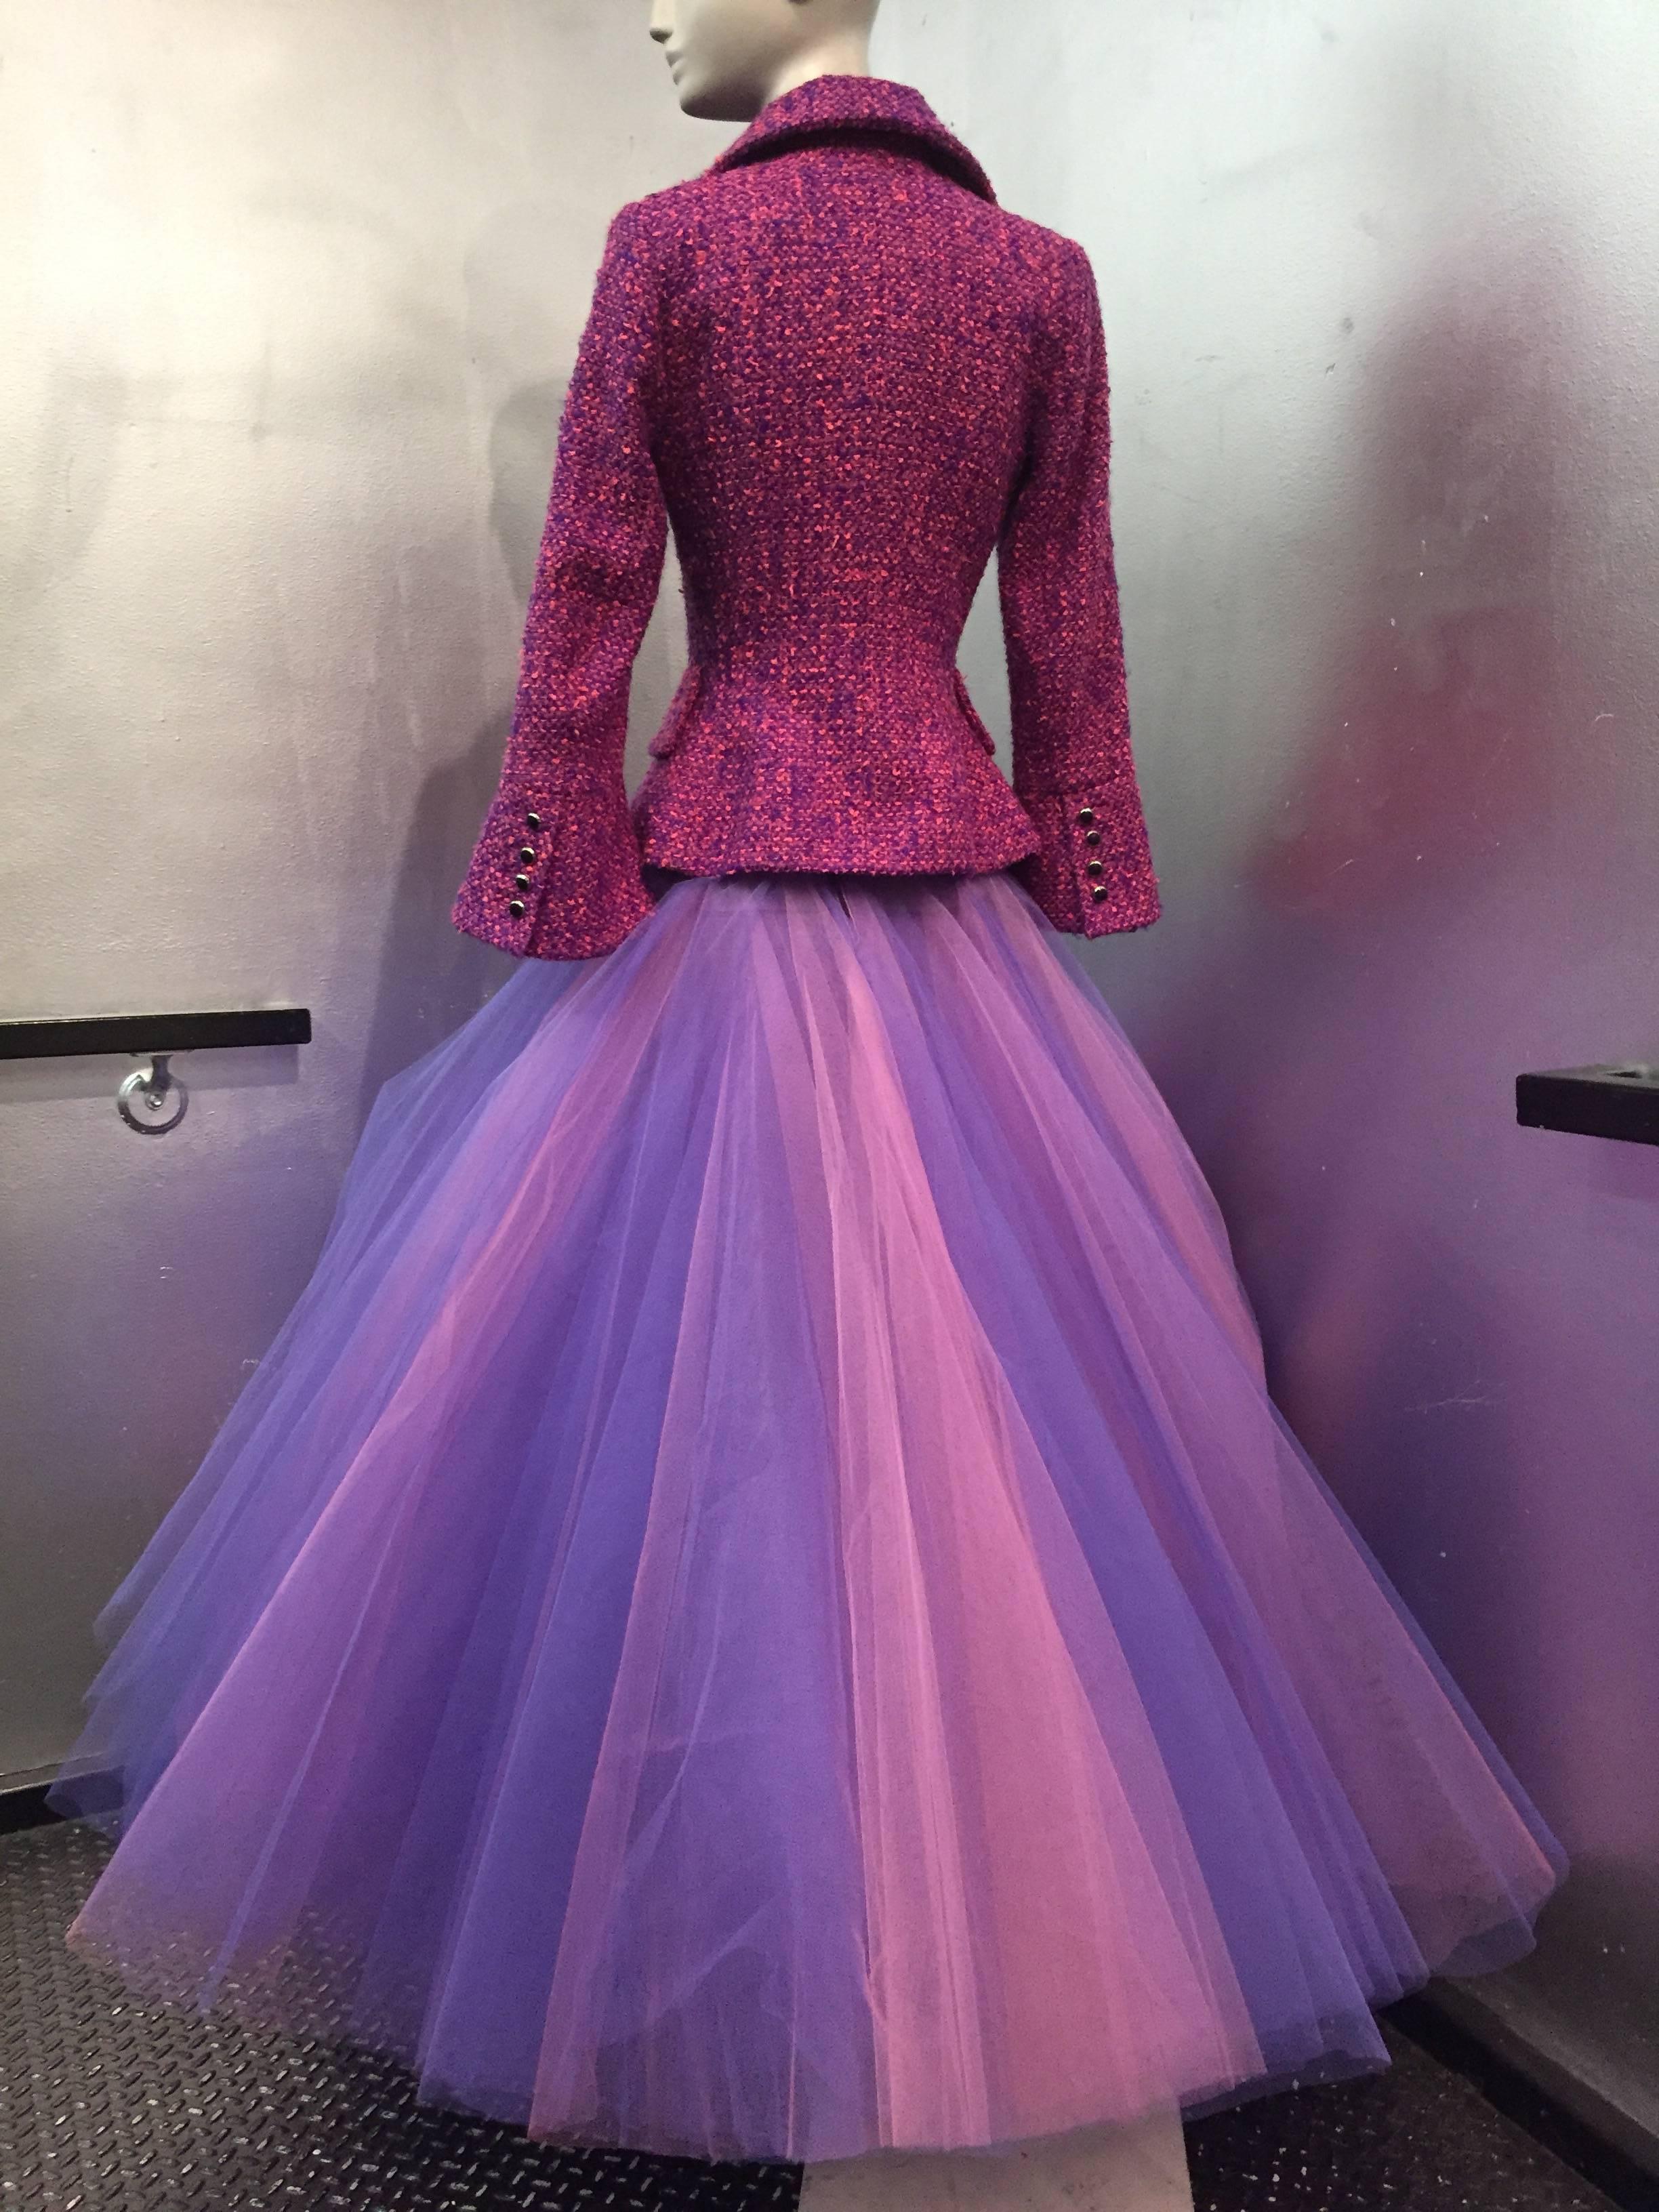 Women's 1990 JACQUES FATH Wool Tweed Jacket and Tulle Ball Skirt in Pink and Purple 